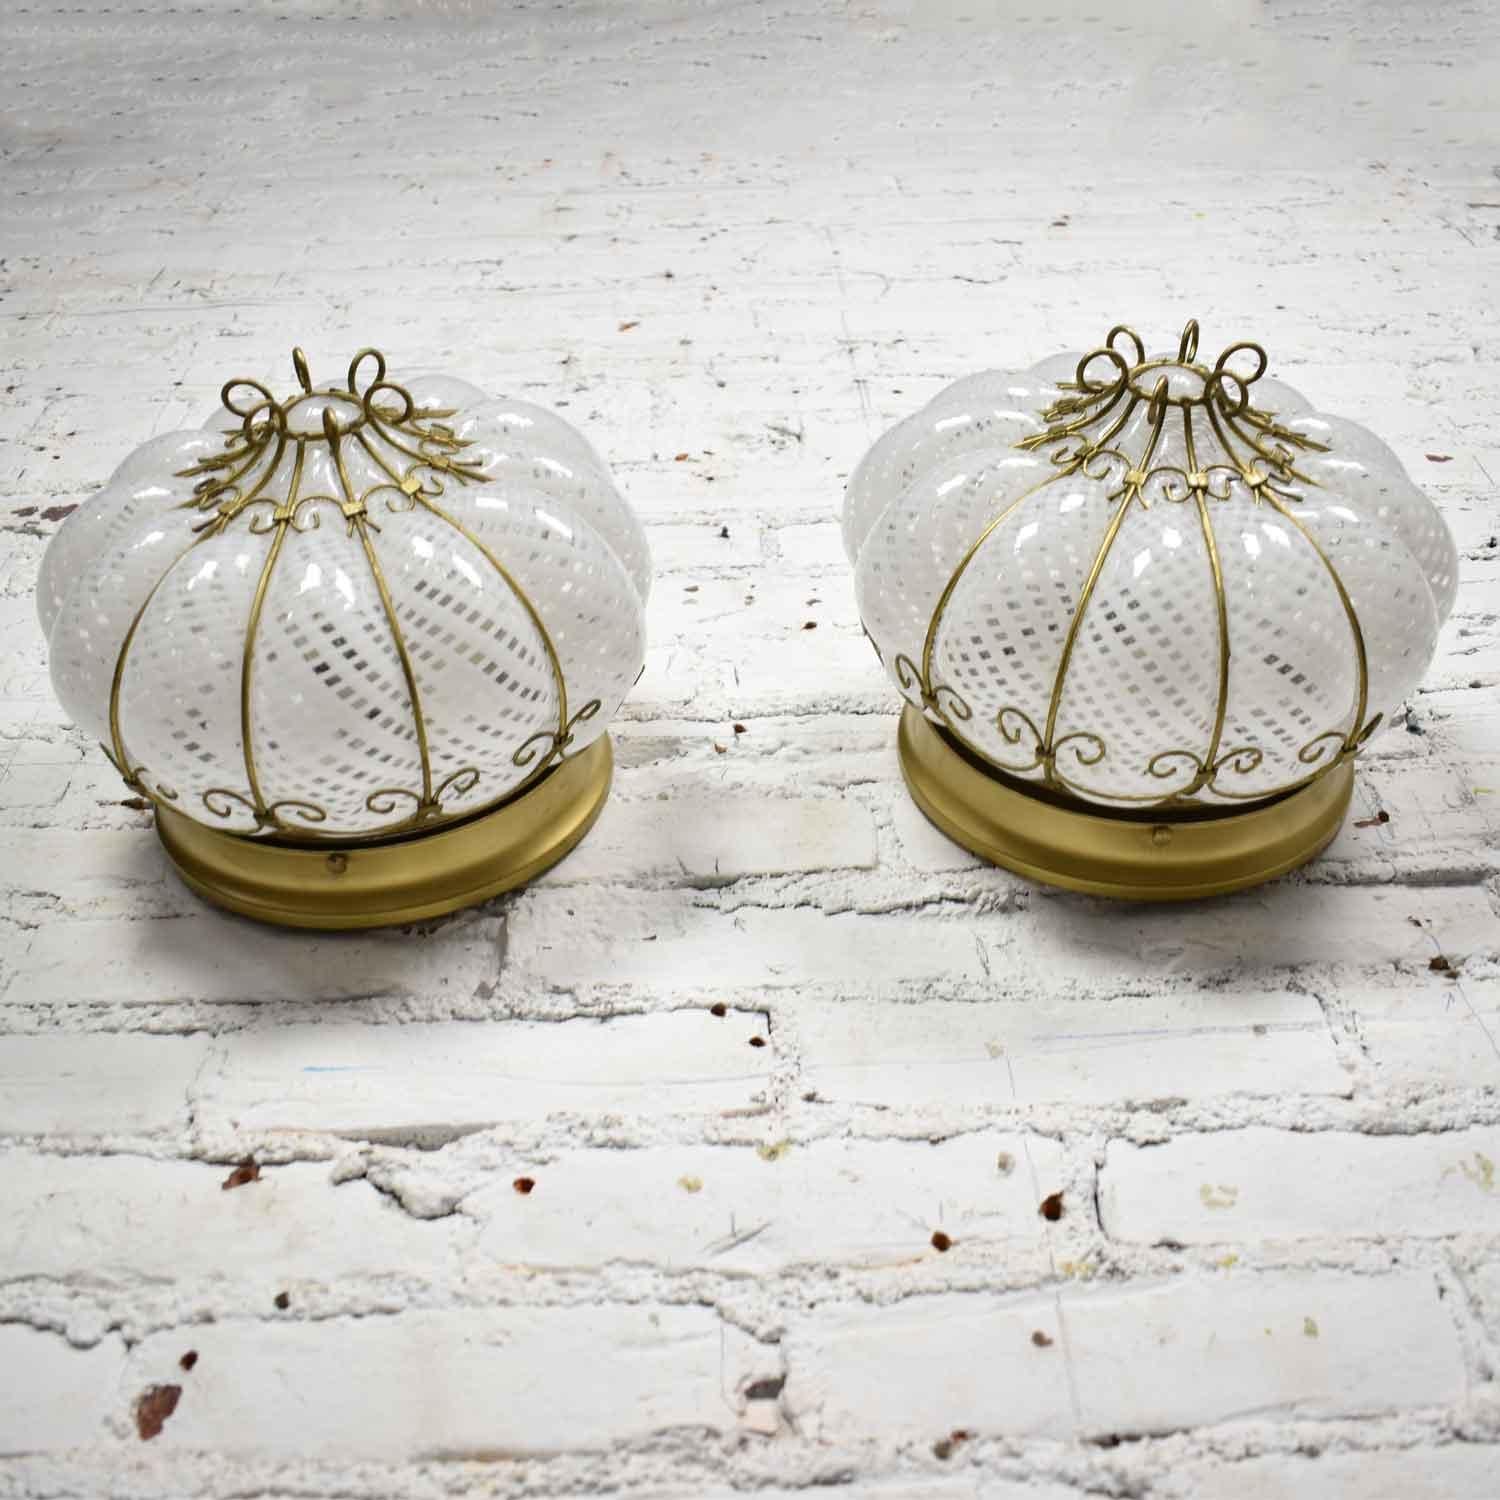 Hollywood Regency Midcentury Gold & White Caged Venetian Latticino Glass Ceiling Lights or Sconce